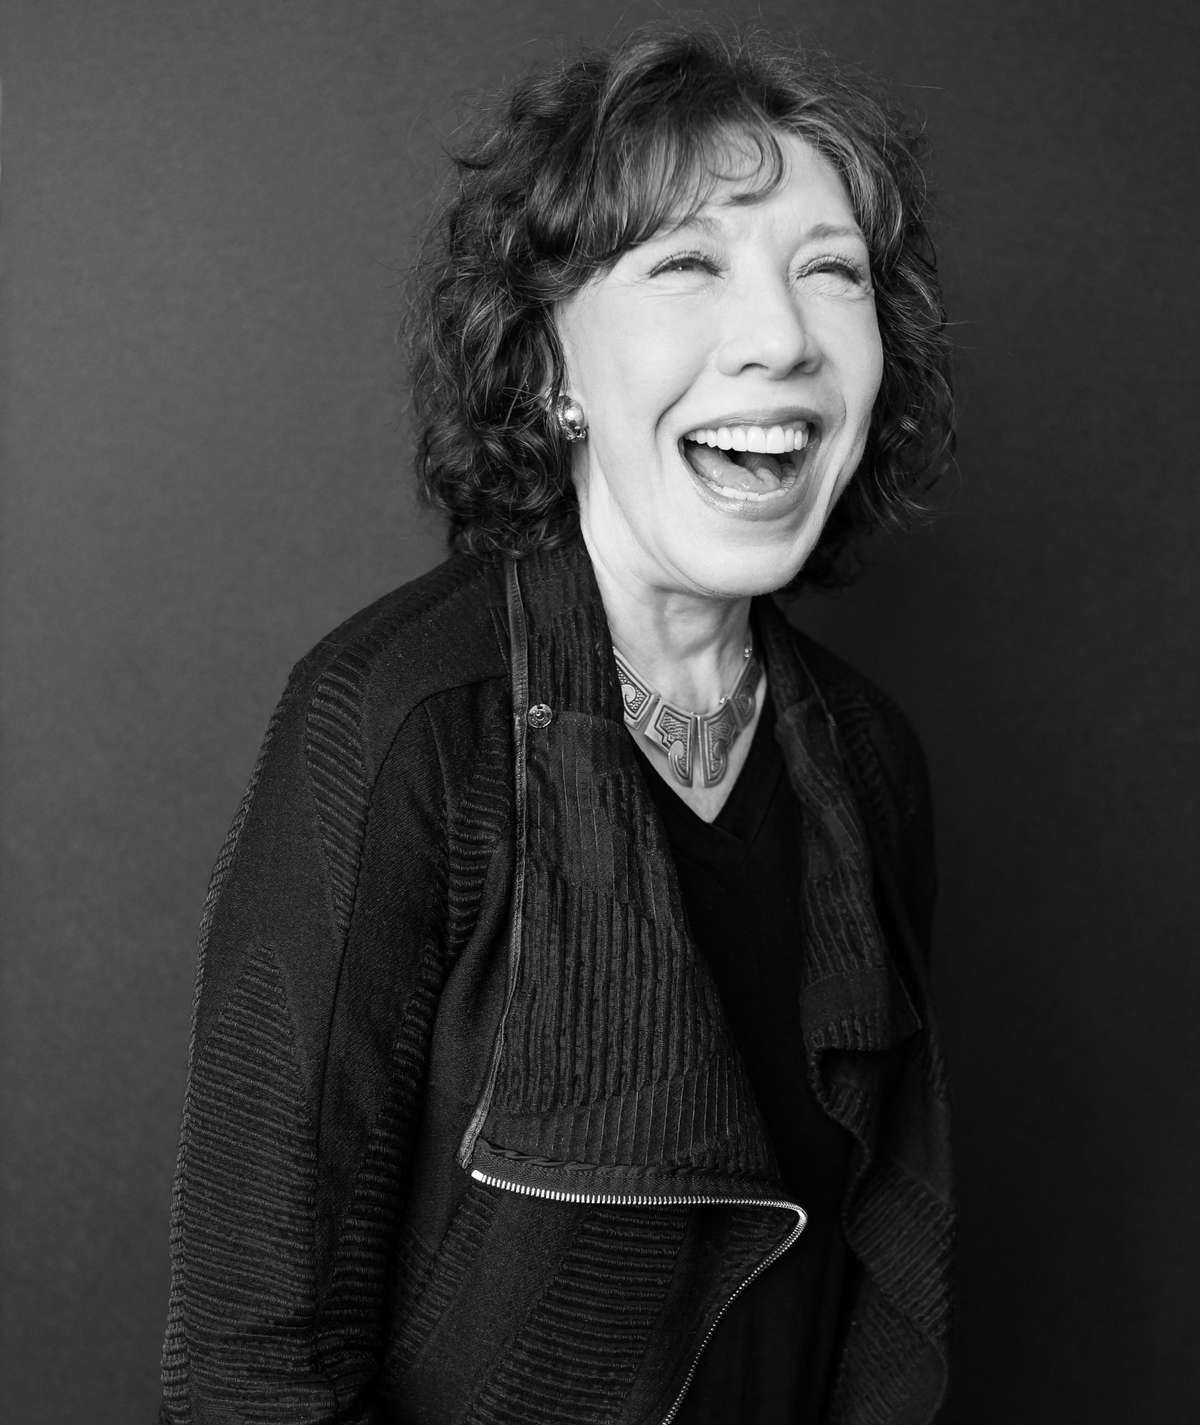 Lily tomlin young pictures